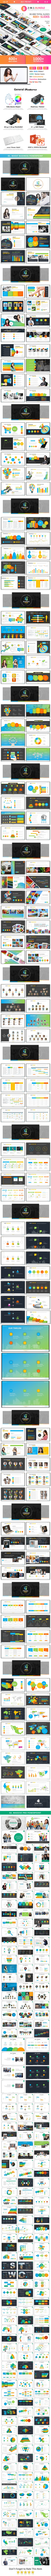 GraphicRiver 2 in 1 Business Bundle Powerpoint 21075773